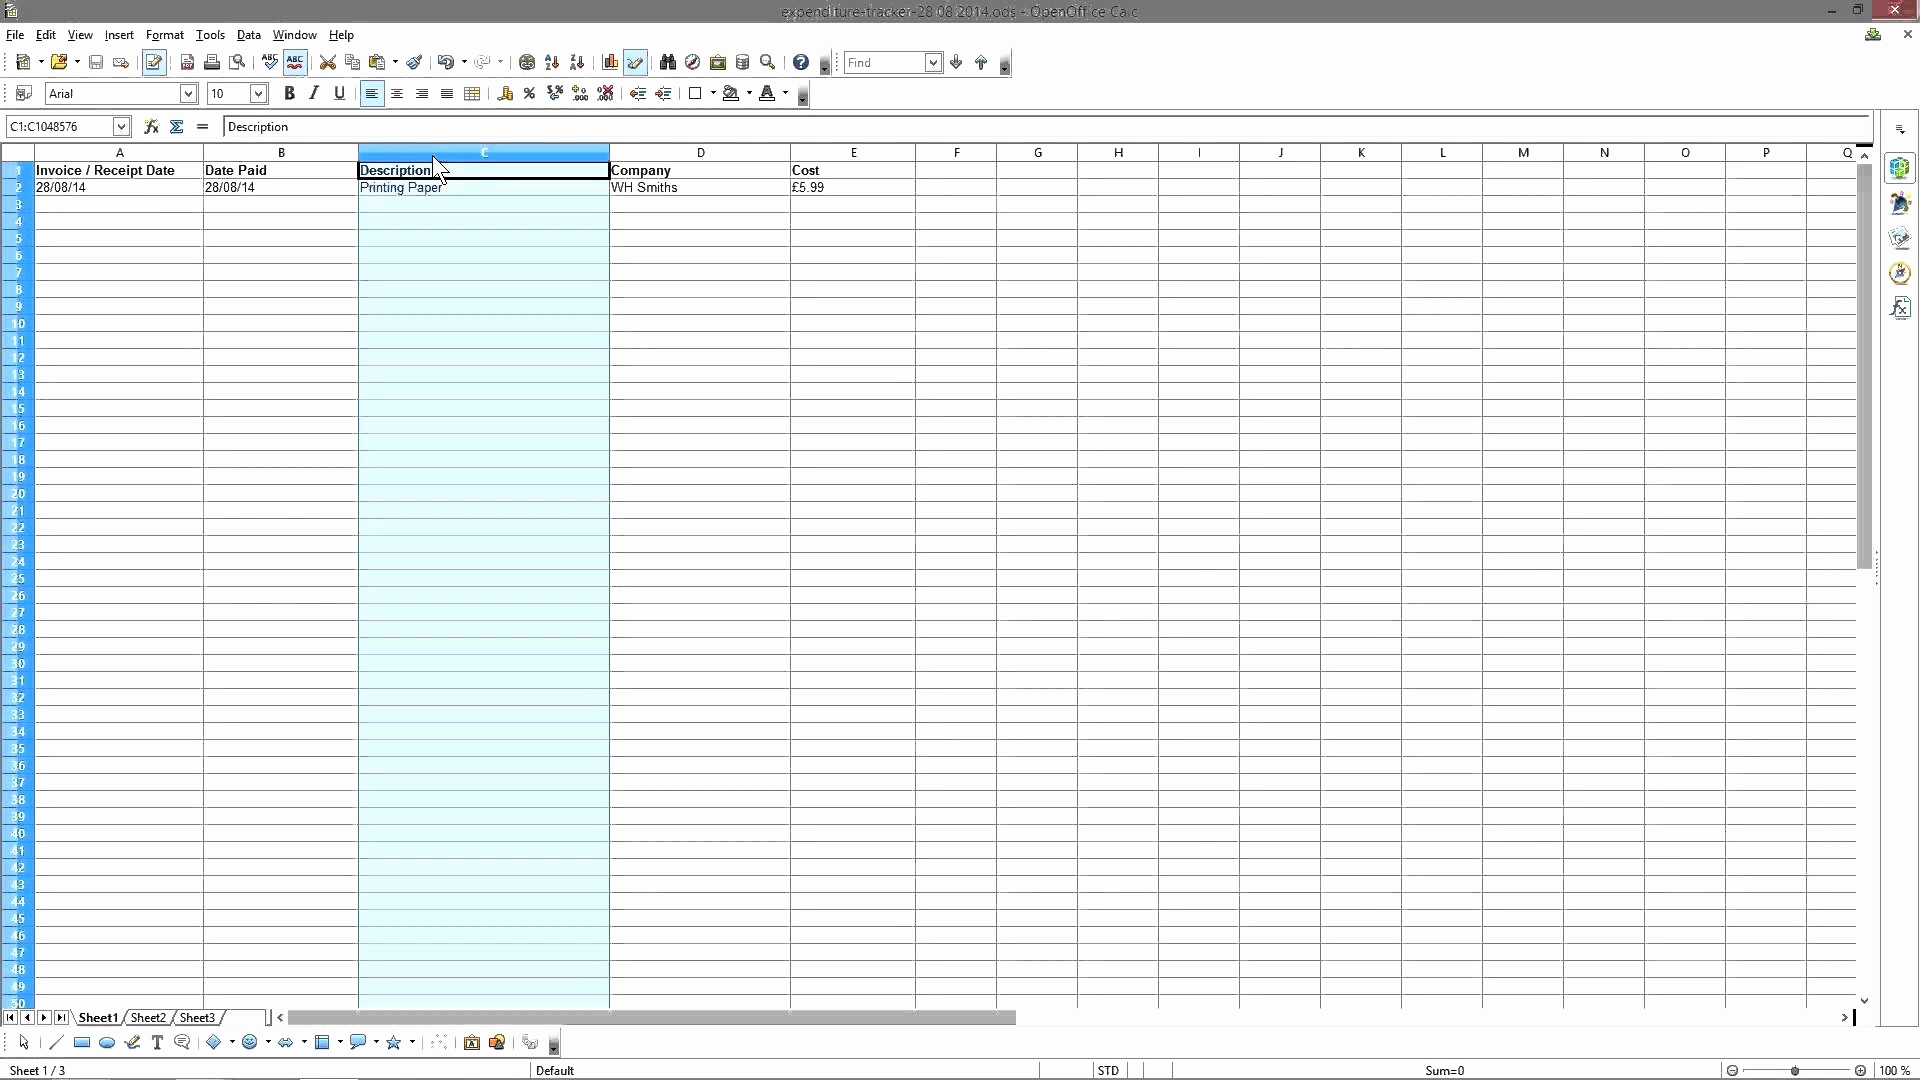 Contract Tracking Excel Template Awesome Contract Tracking for Contract Tracking Spreadsheet